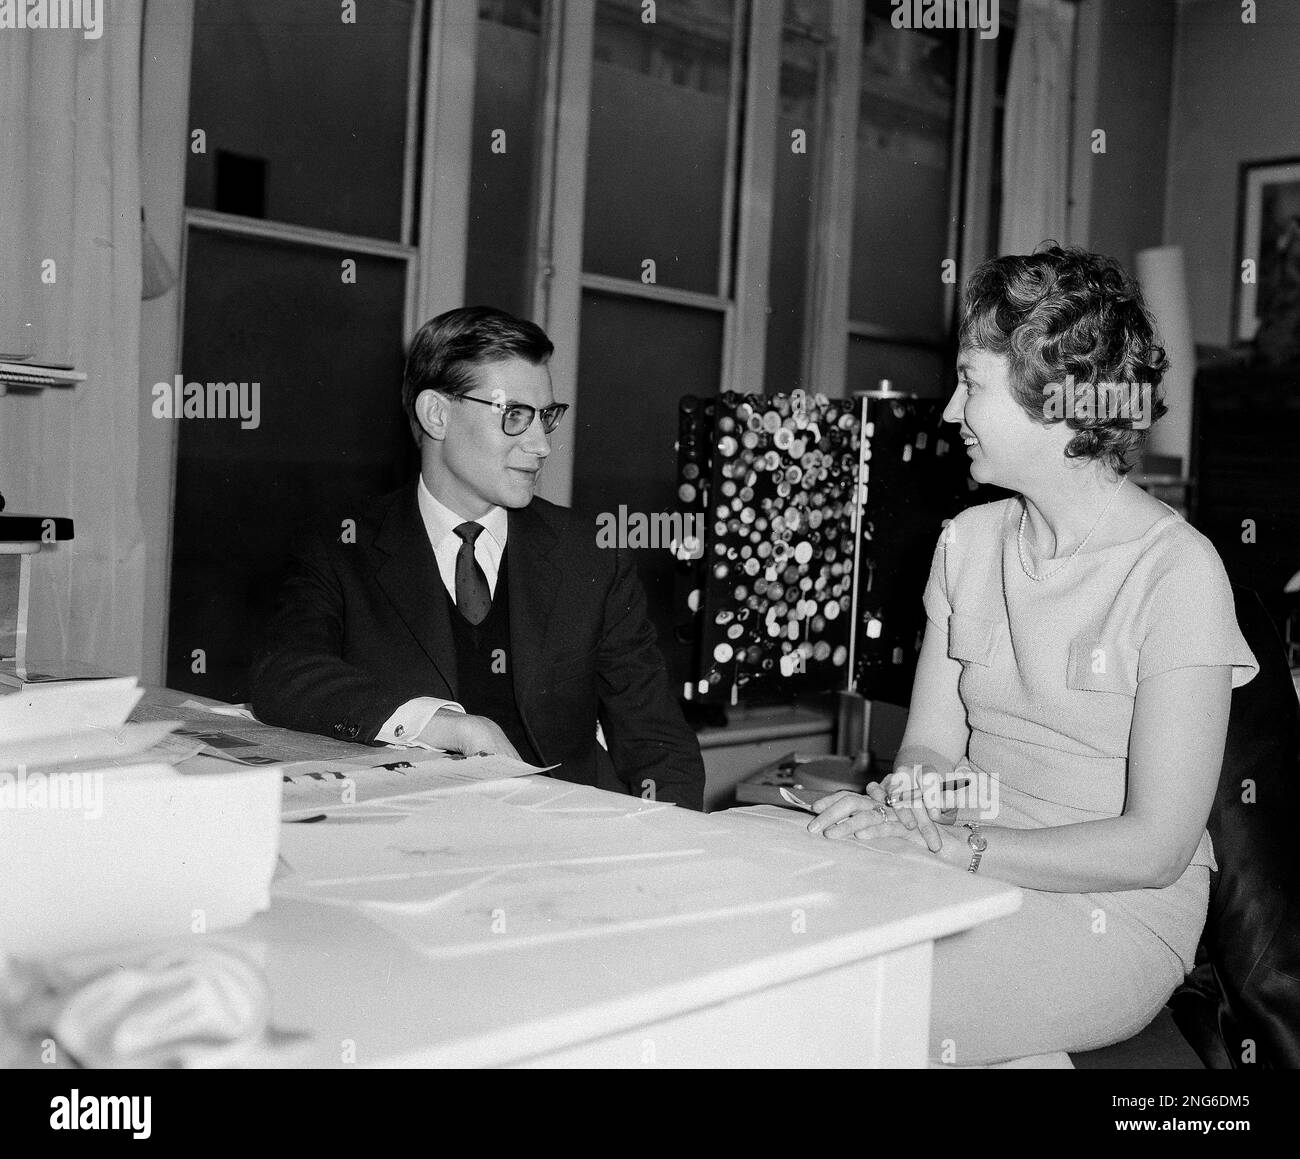 French fashion designer Yves Saint Laurent, 21-year-old successor to the  late Christian Dior, is interviewed by Nadine Walker, Associated Press  reporter, at the designer's office in Paris, March 14, 1958. Upon the